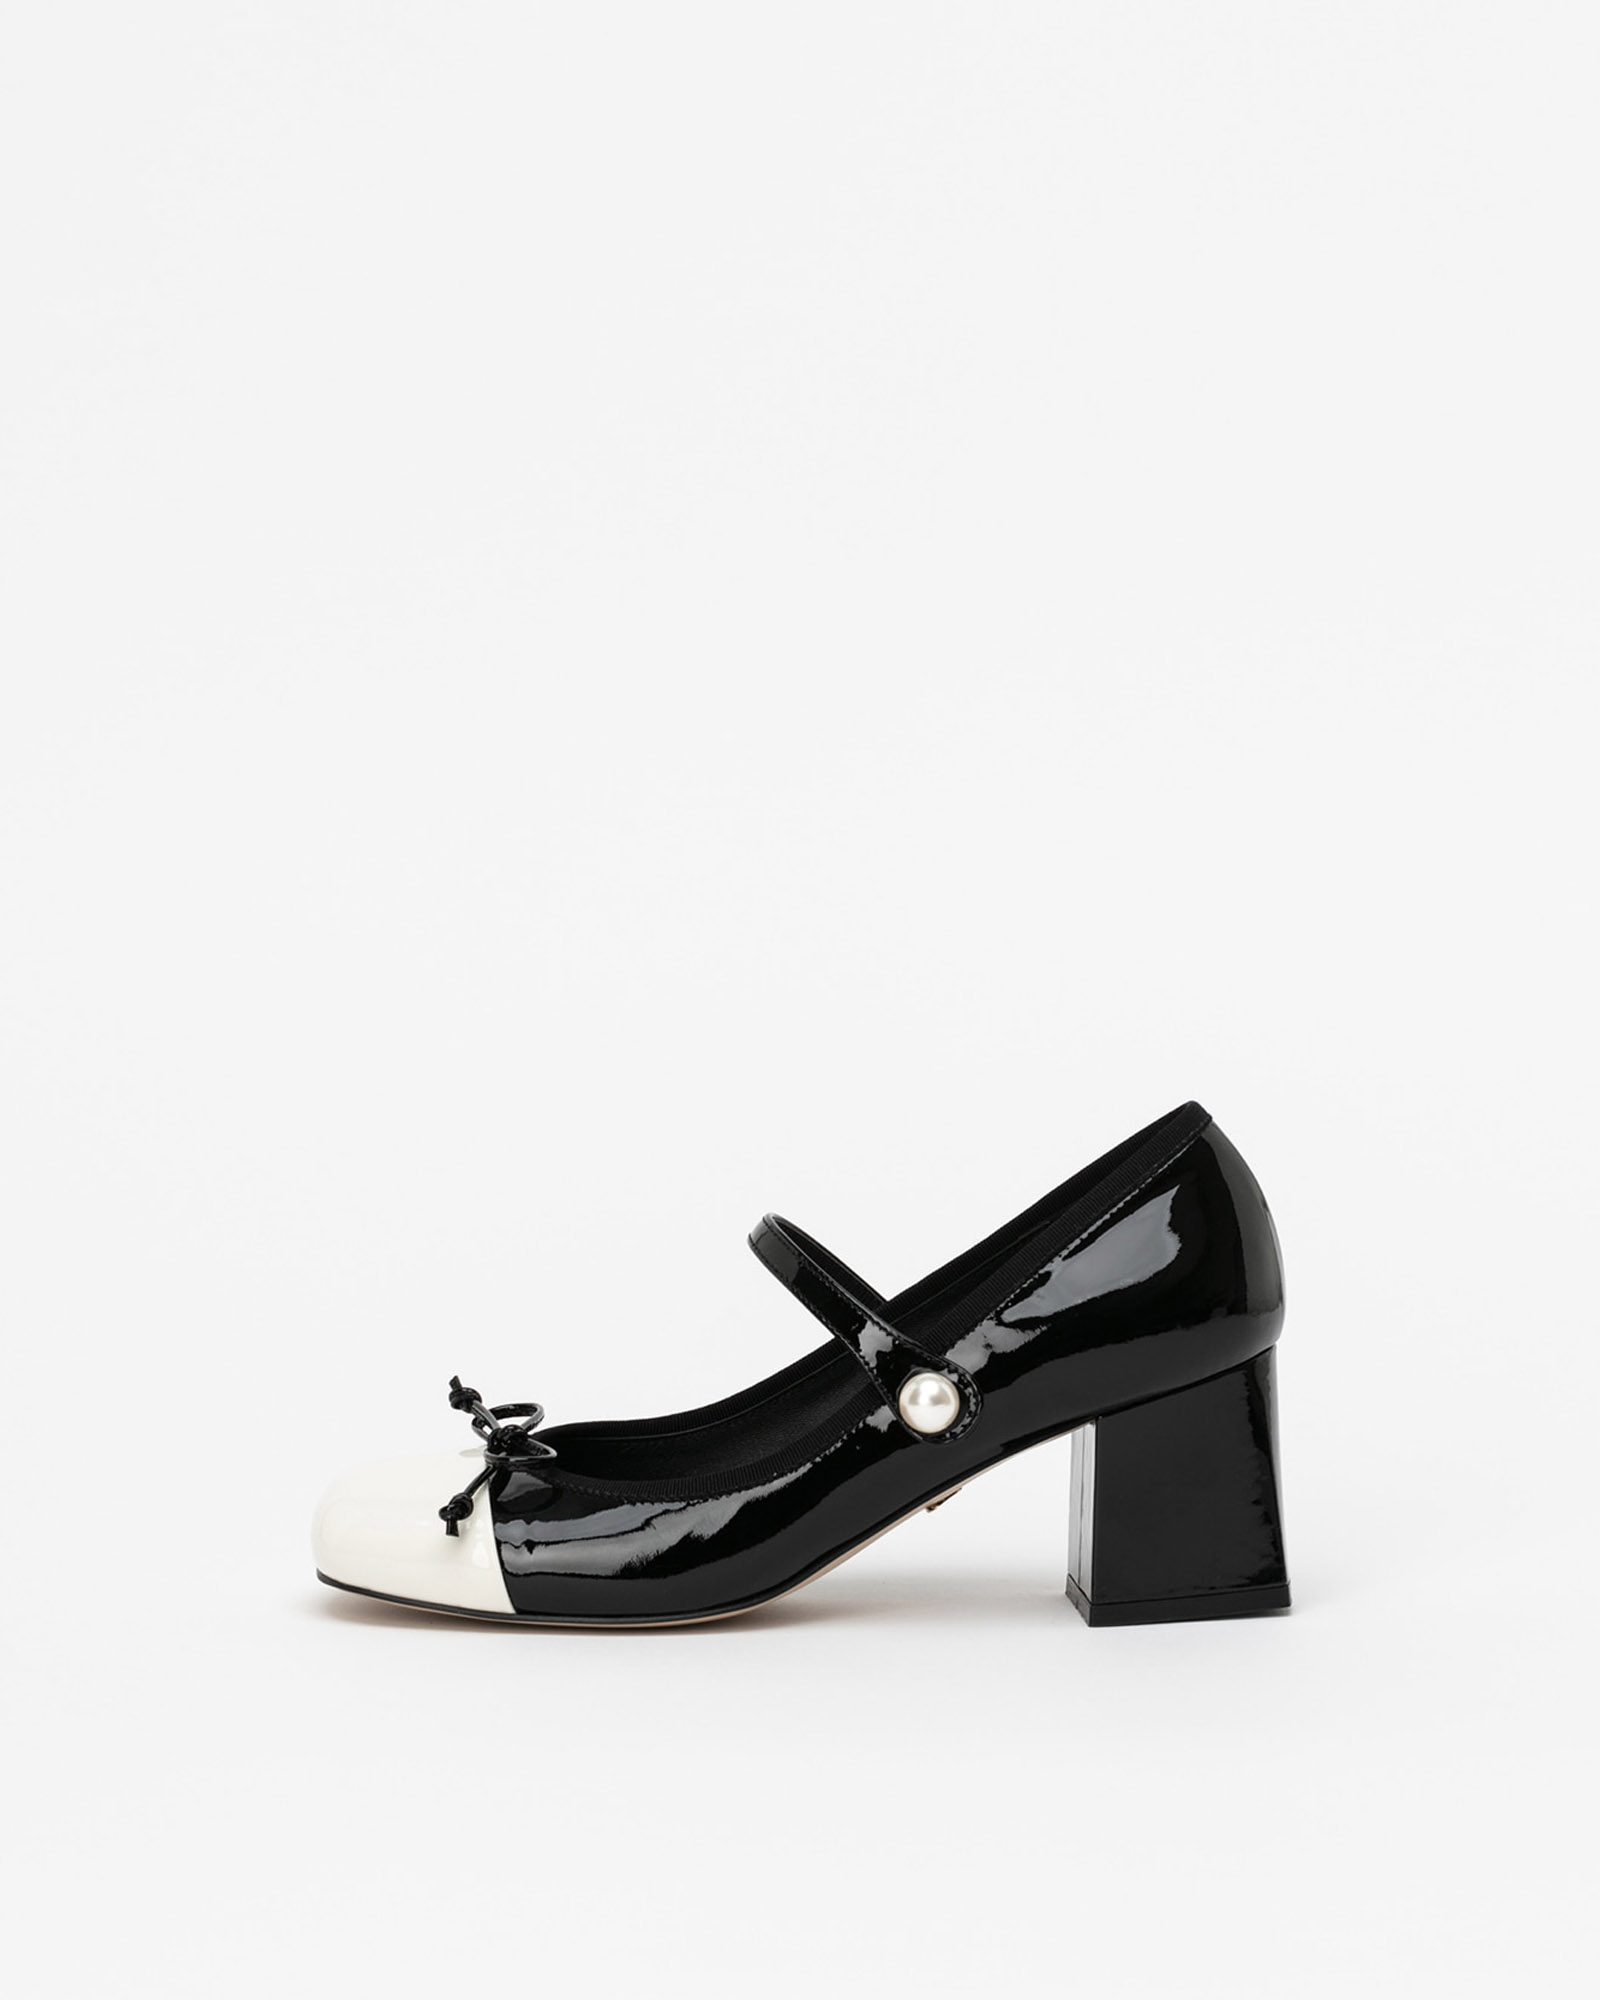 Tune Maryjane Pumps in Black patent with Milky White Patent